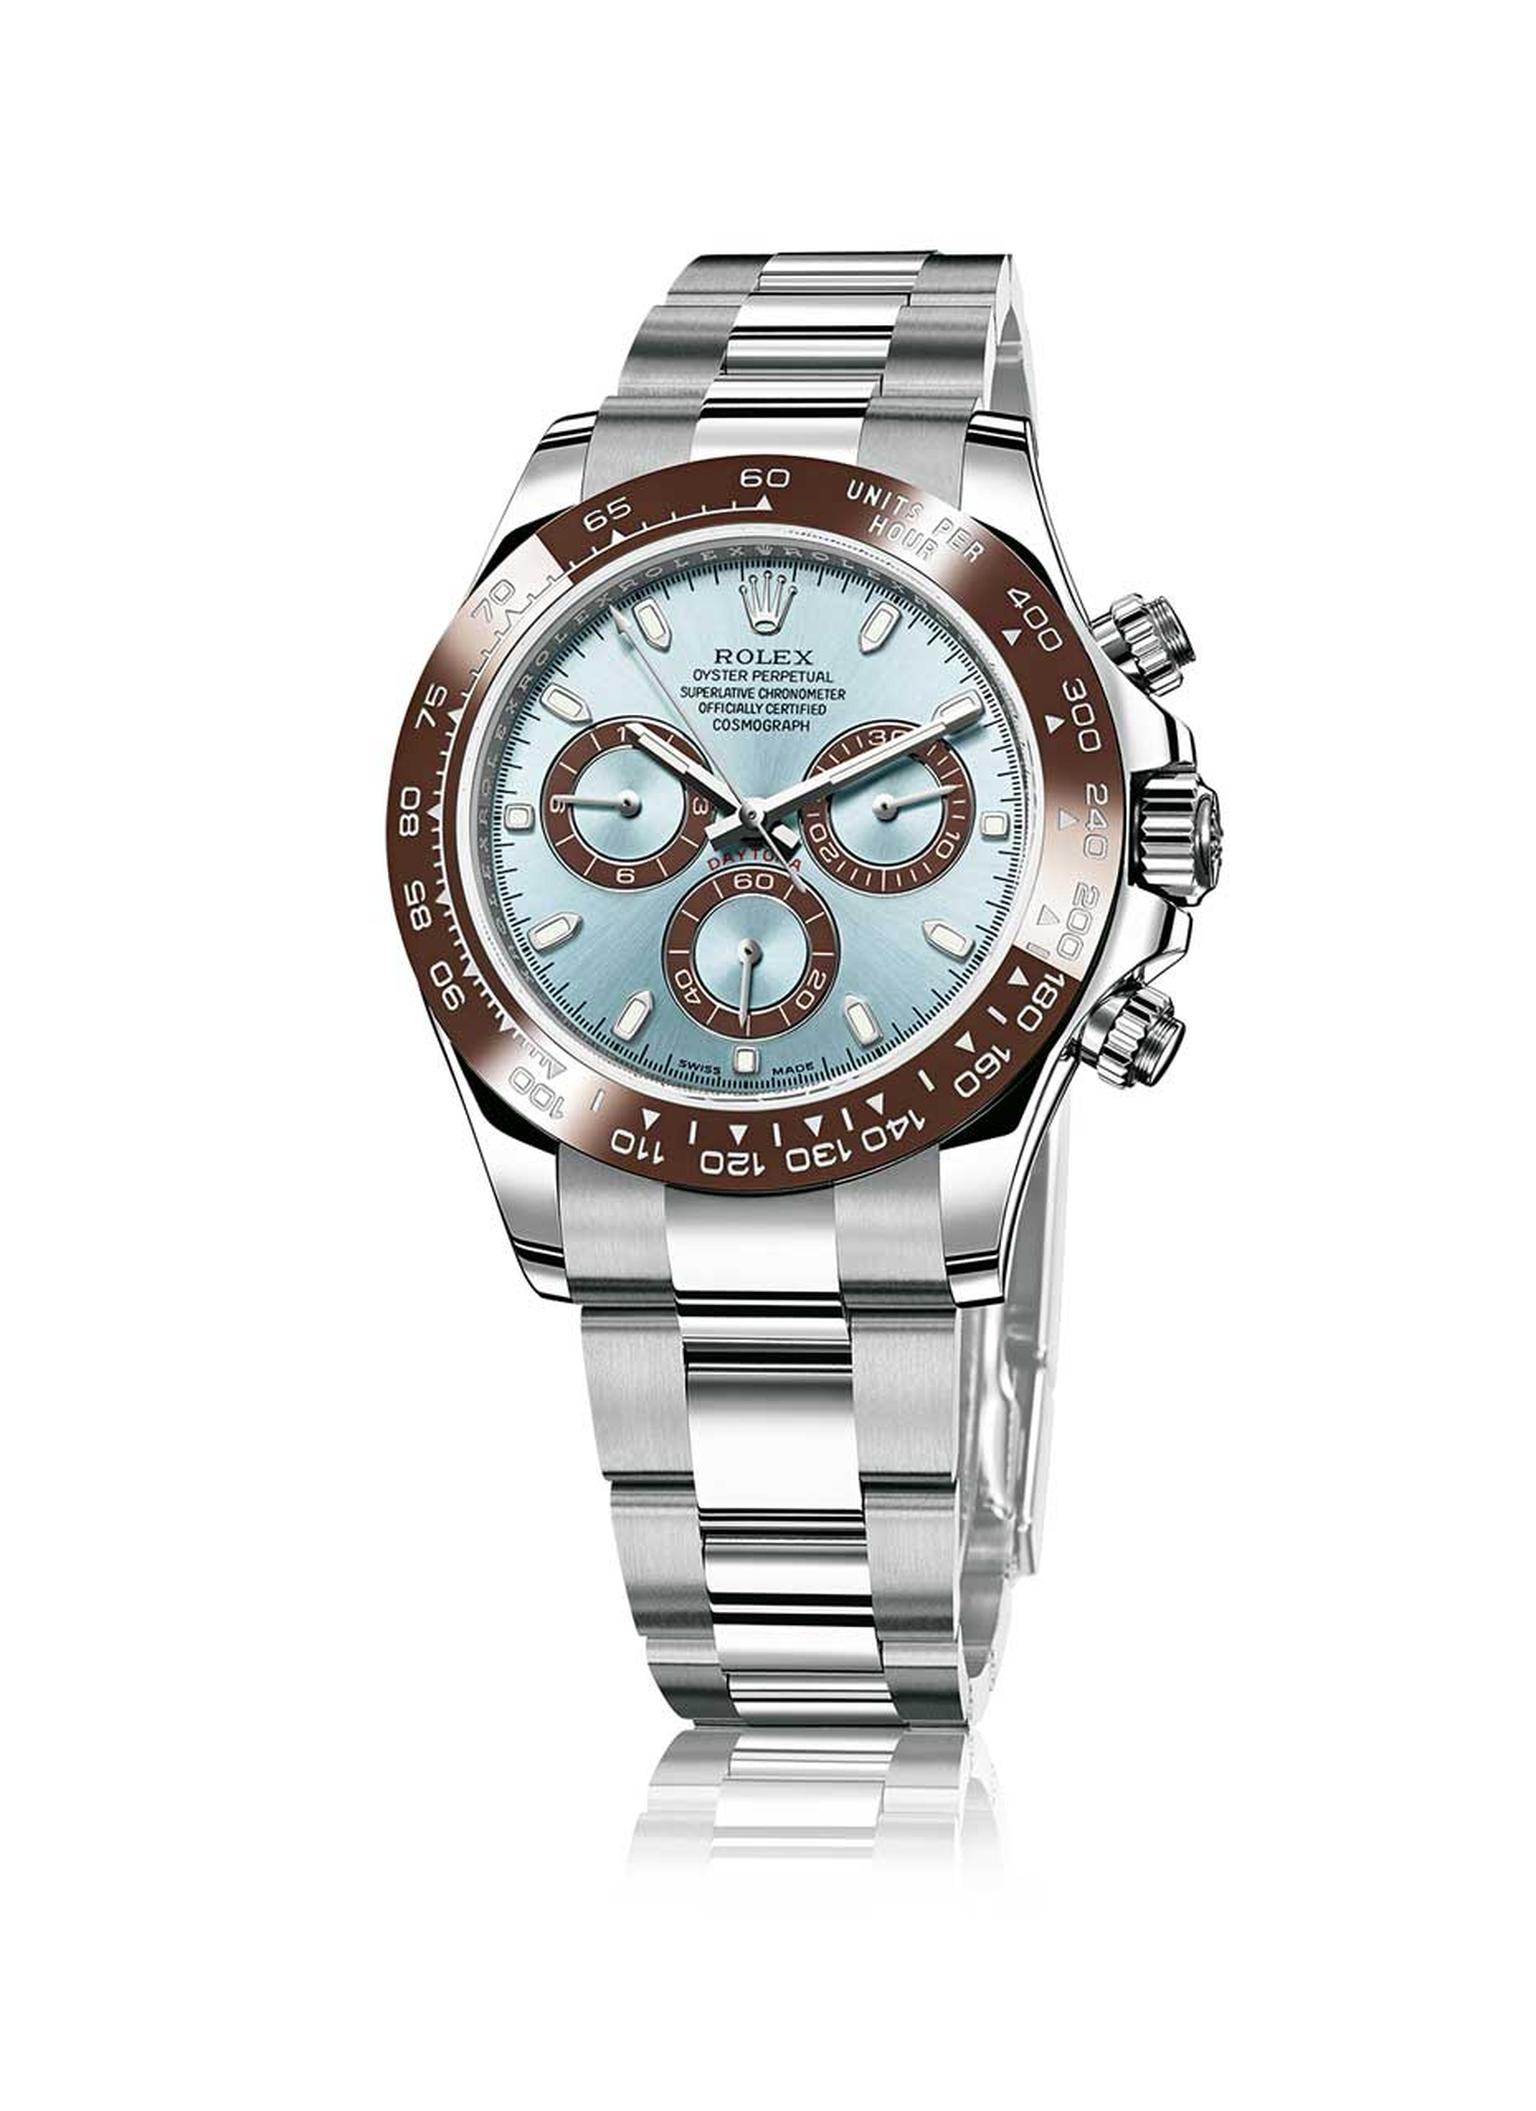 Rolex Cosmograph Daytona is continuously revisited in different materials and colours. This 50th anniversary model in platinum was presented in 2013.